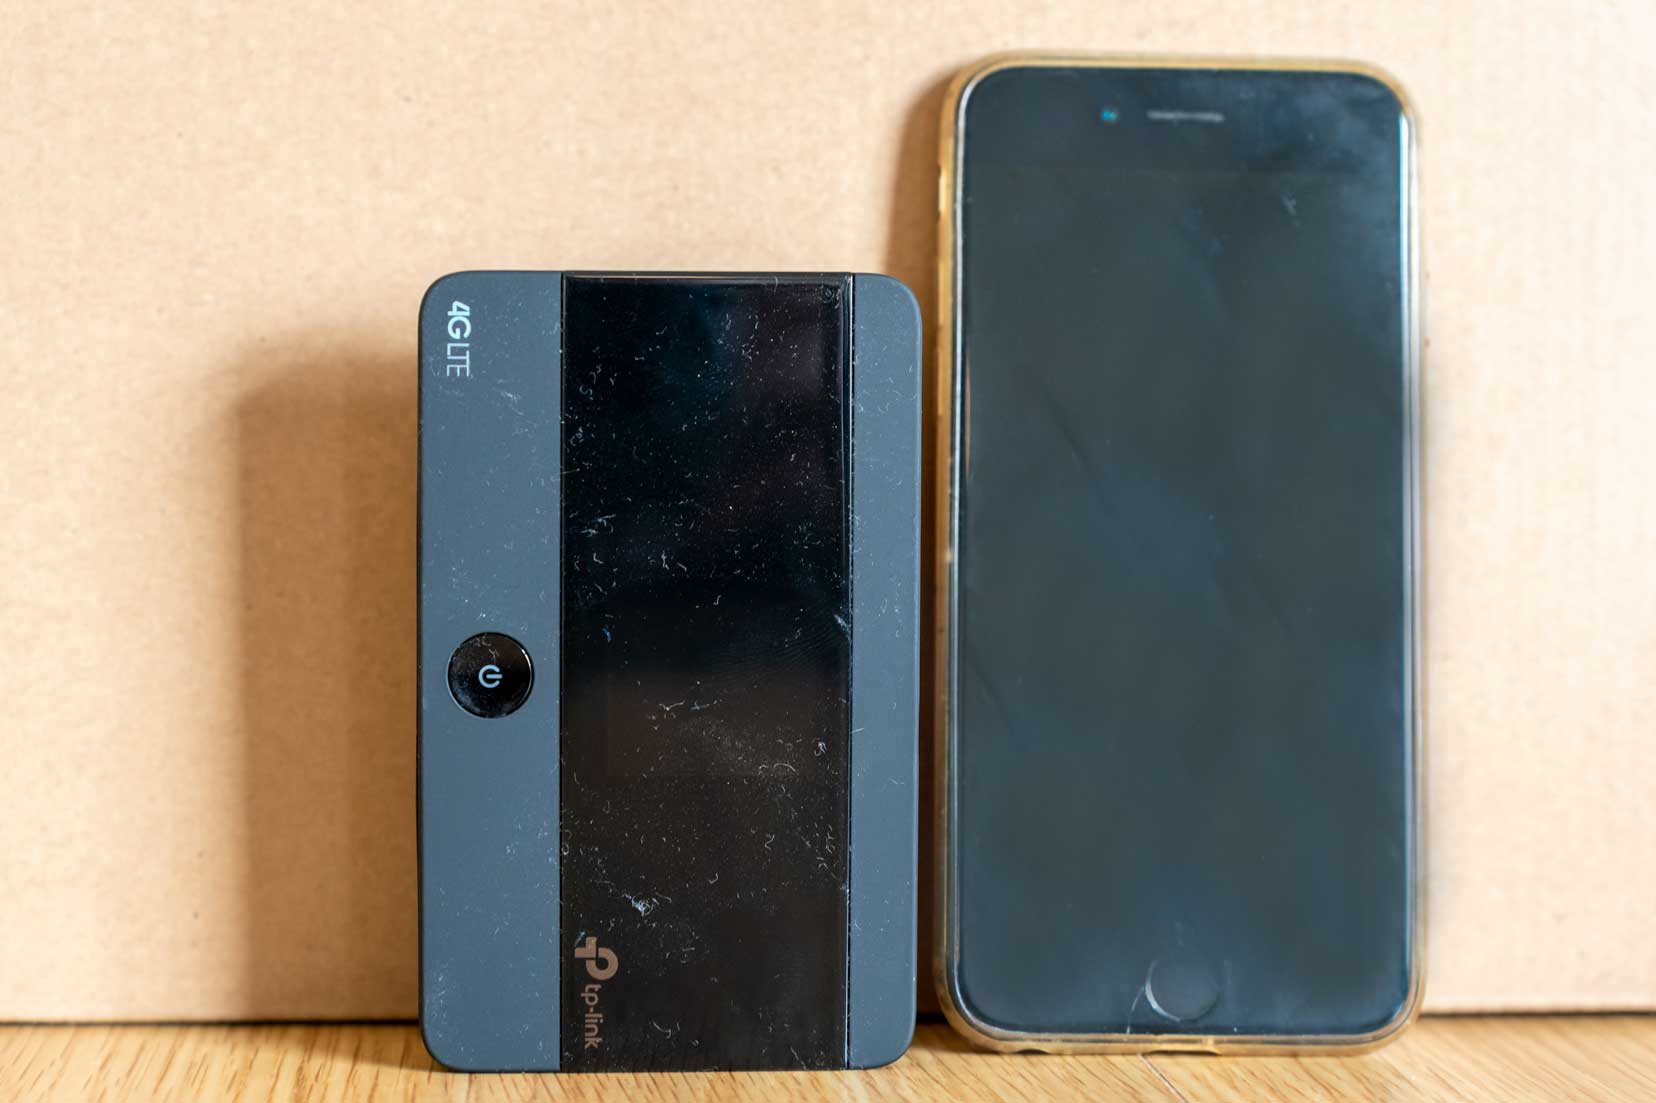 Travel wifi router compared to size of iPhone 6